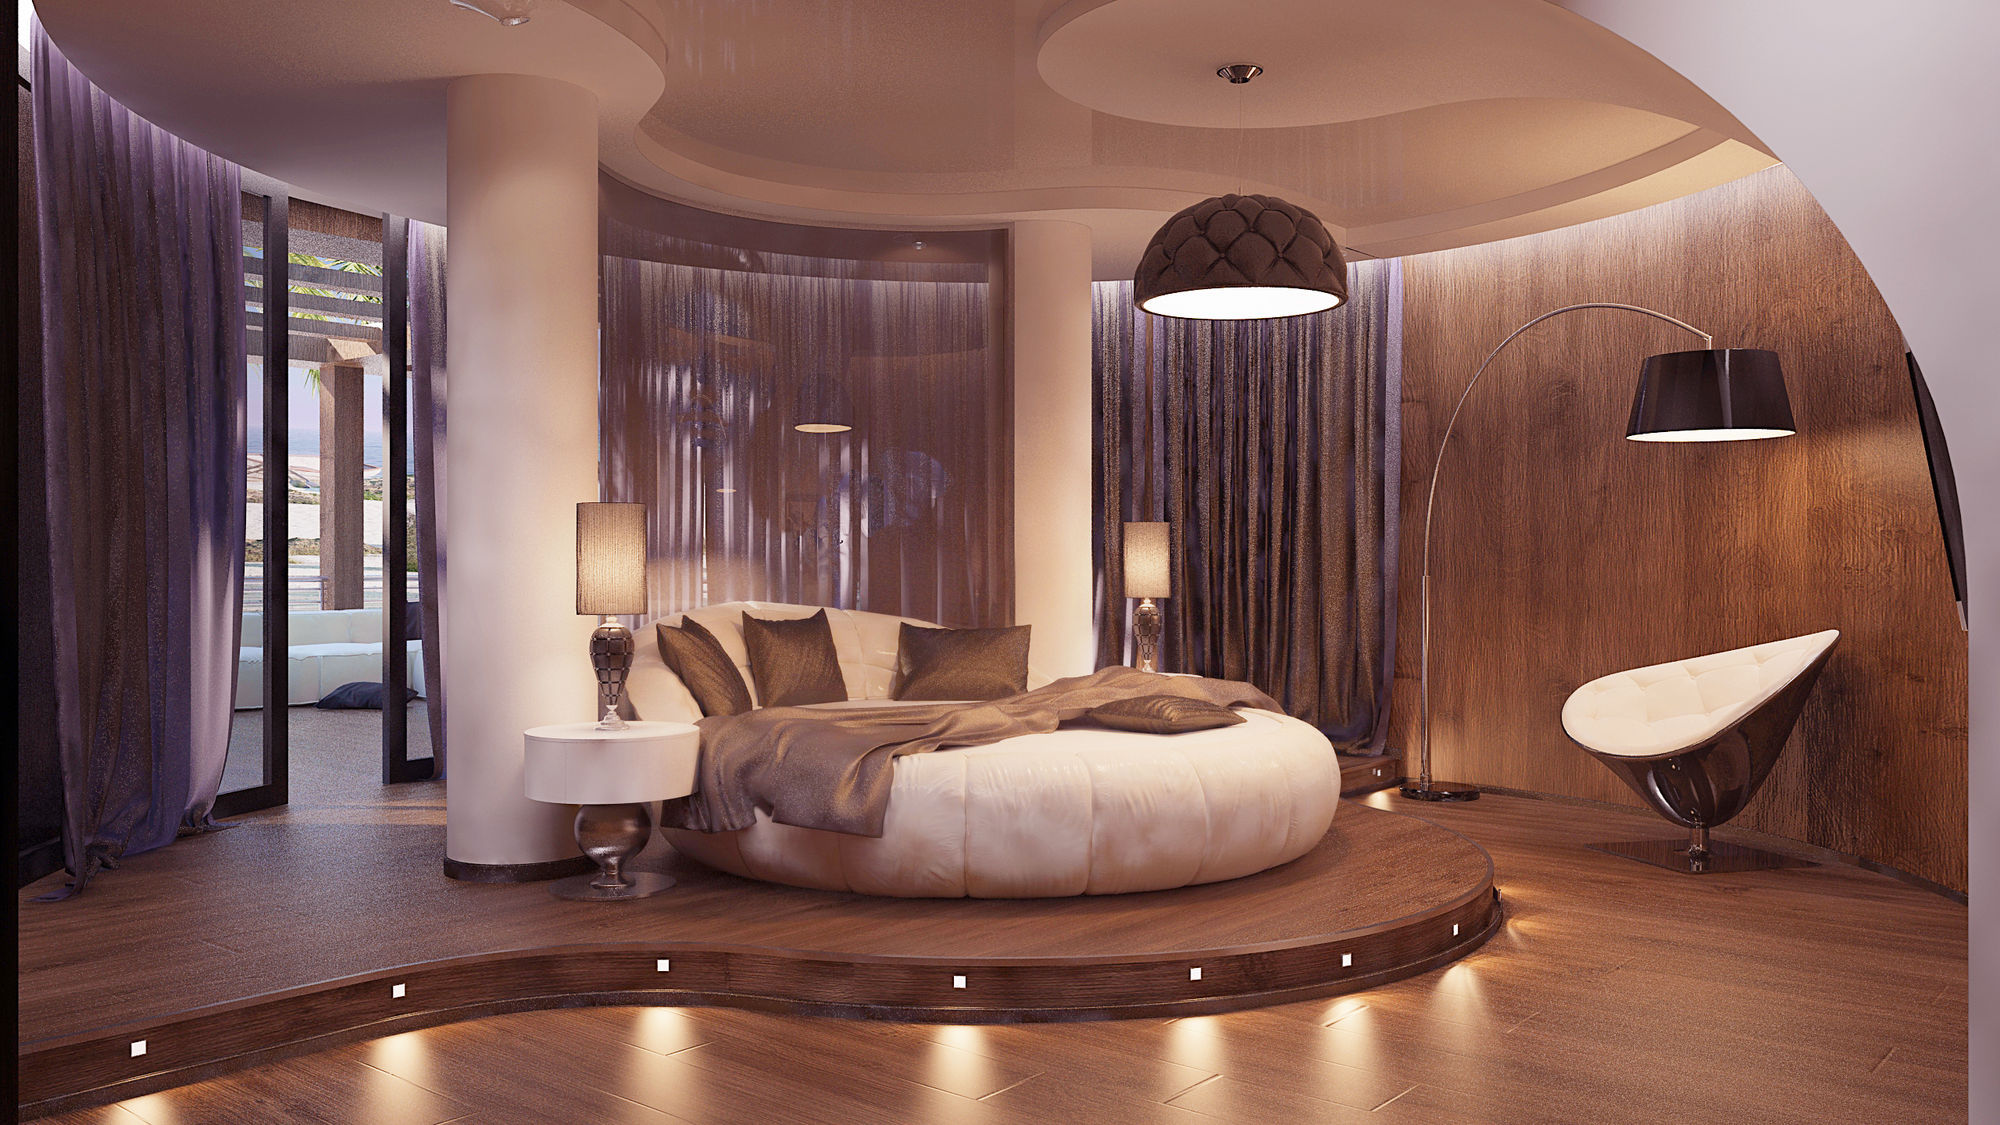 Image: Bedroom, bed, round, cushion, lamp, floor lamp, curtains, columns